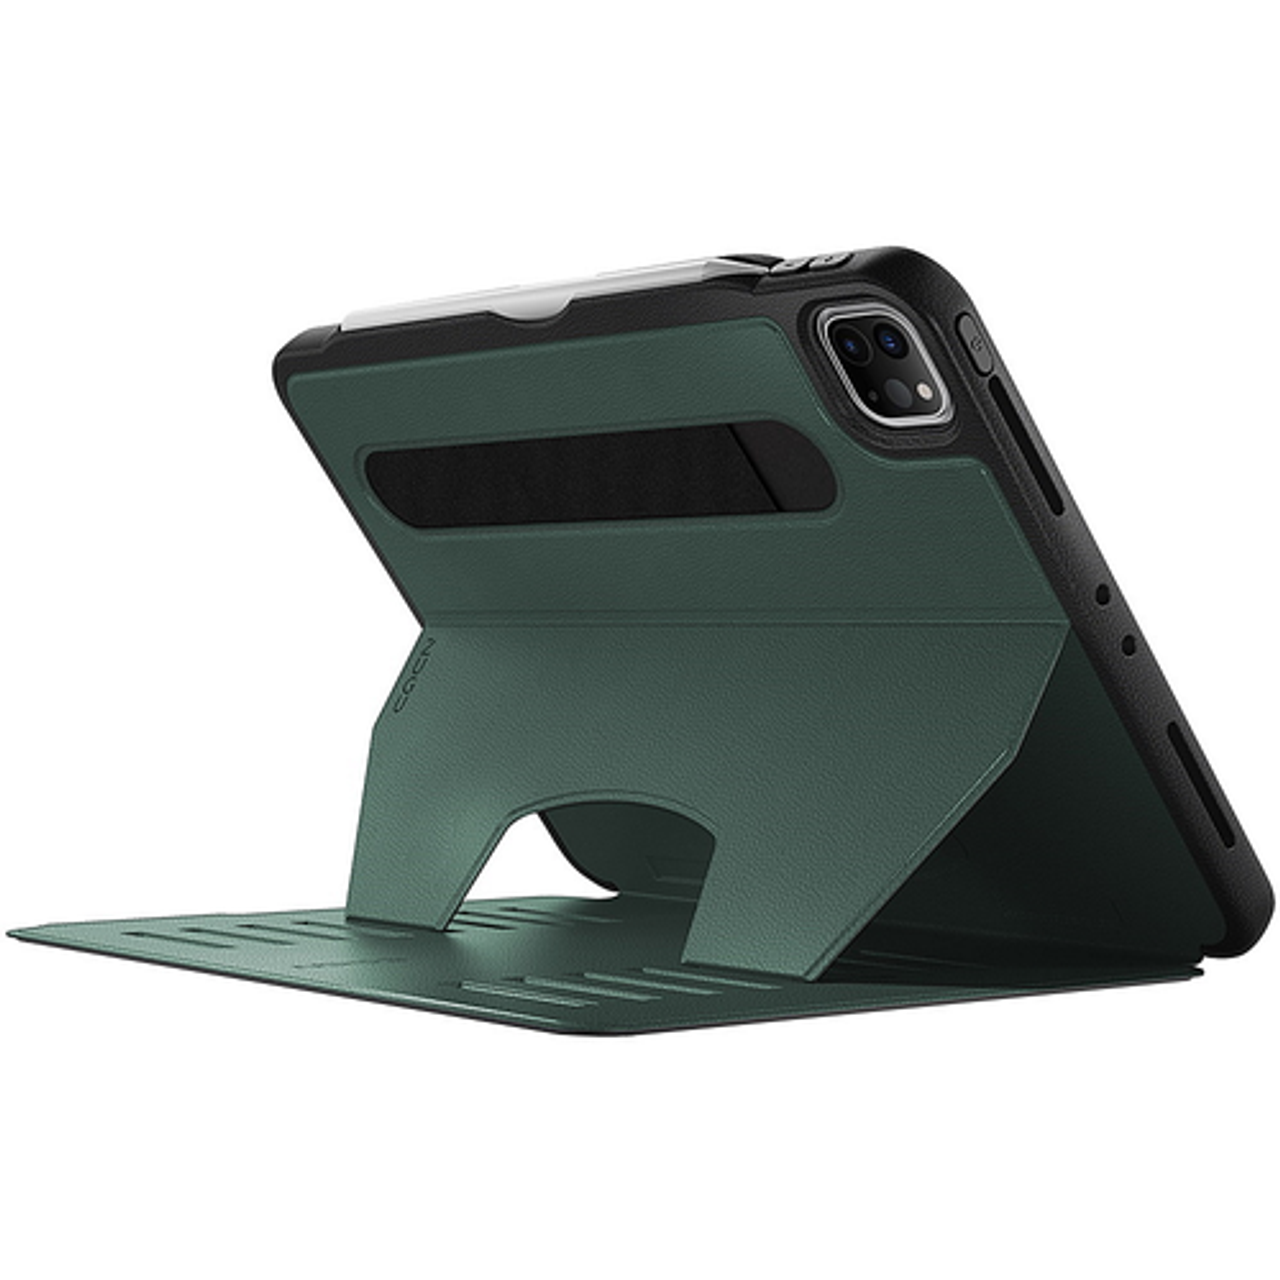 ZUGU - Slim Protective Case for Apple iPad Pro 11 Case (1st/2nd/3rd/4th Generation, 2018/2020/2021/2022) - Pine Green